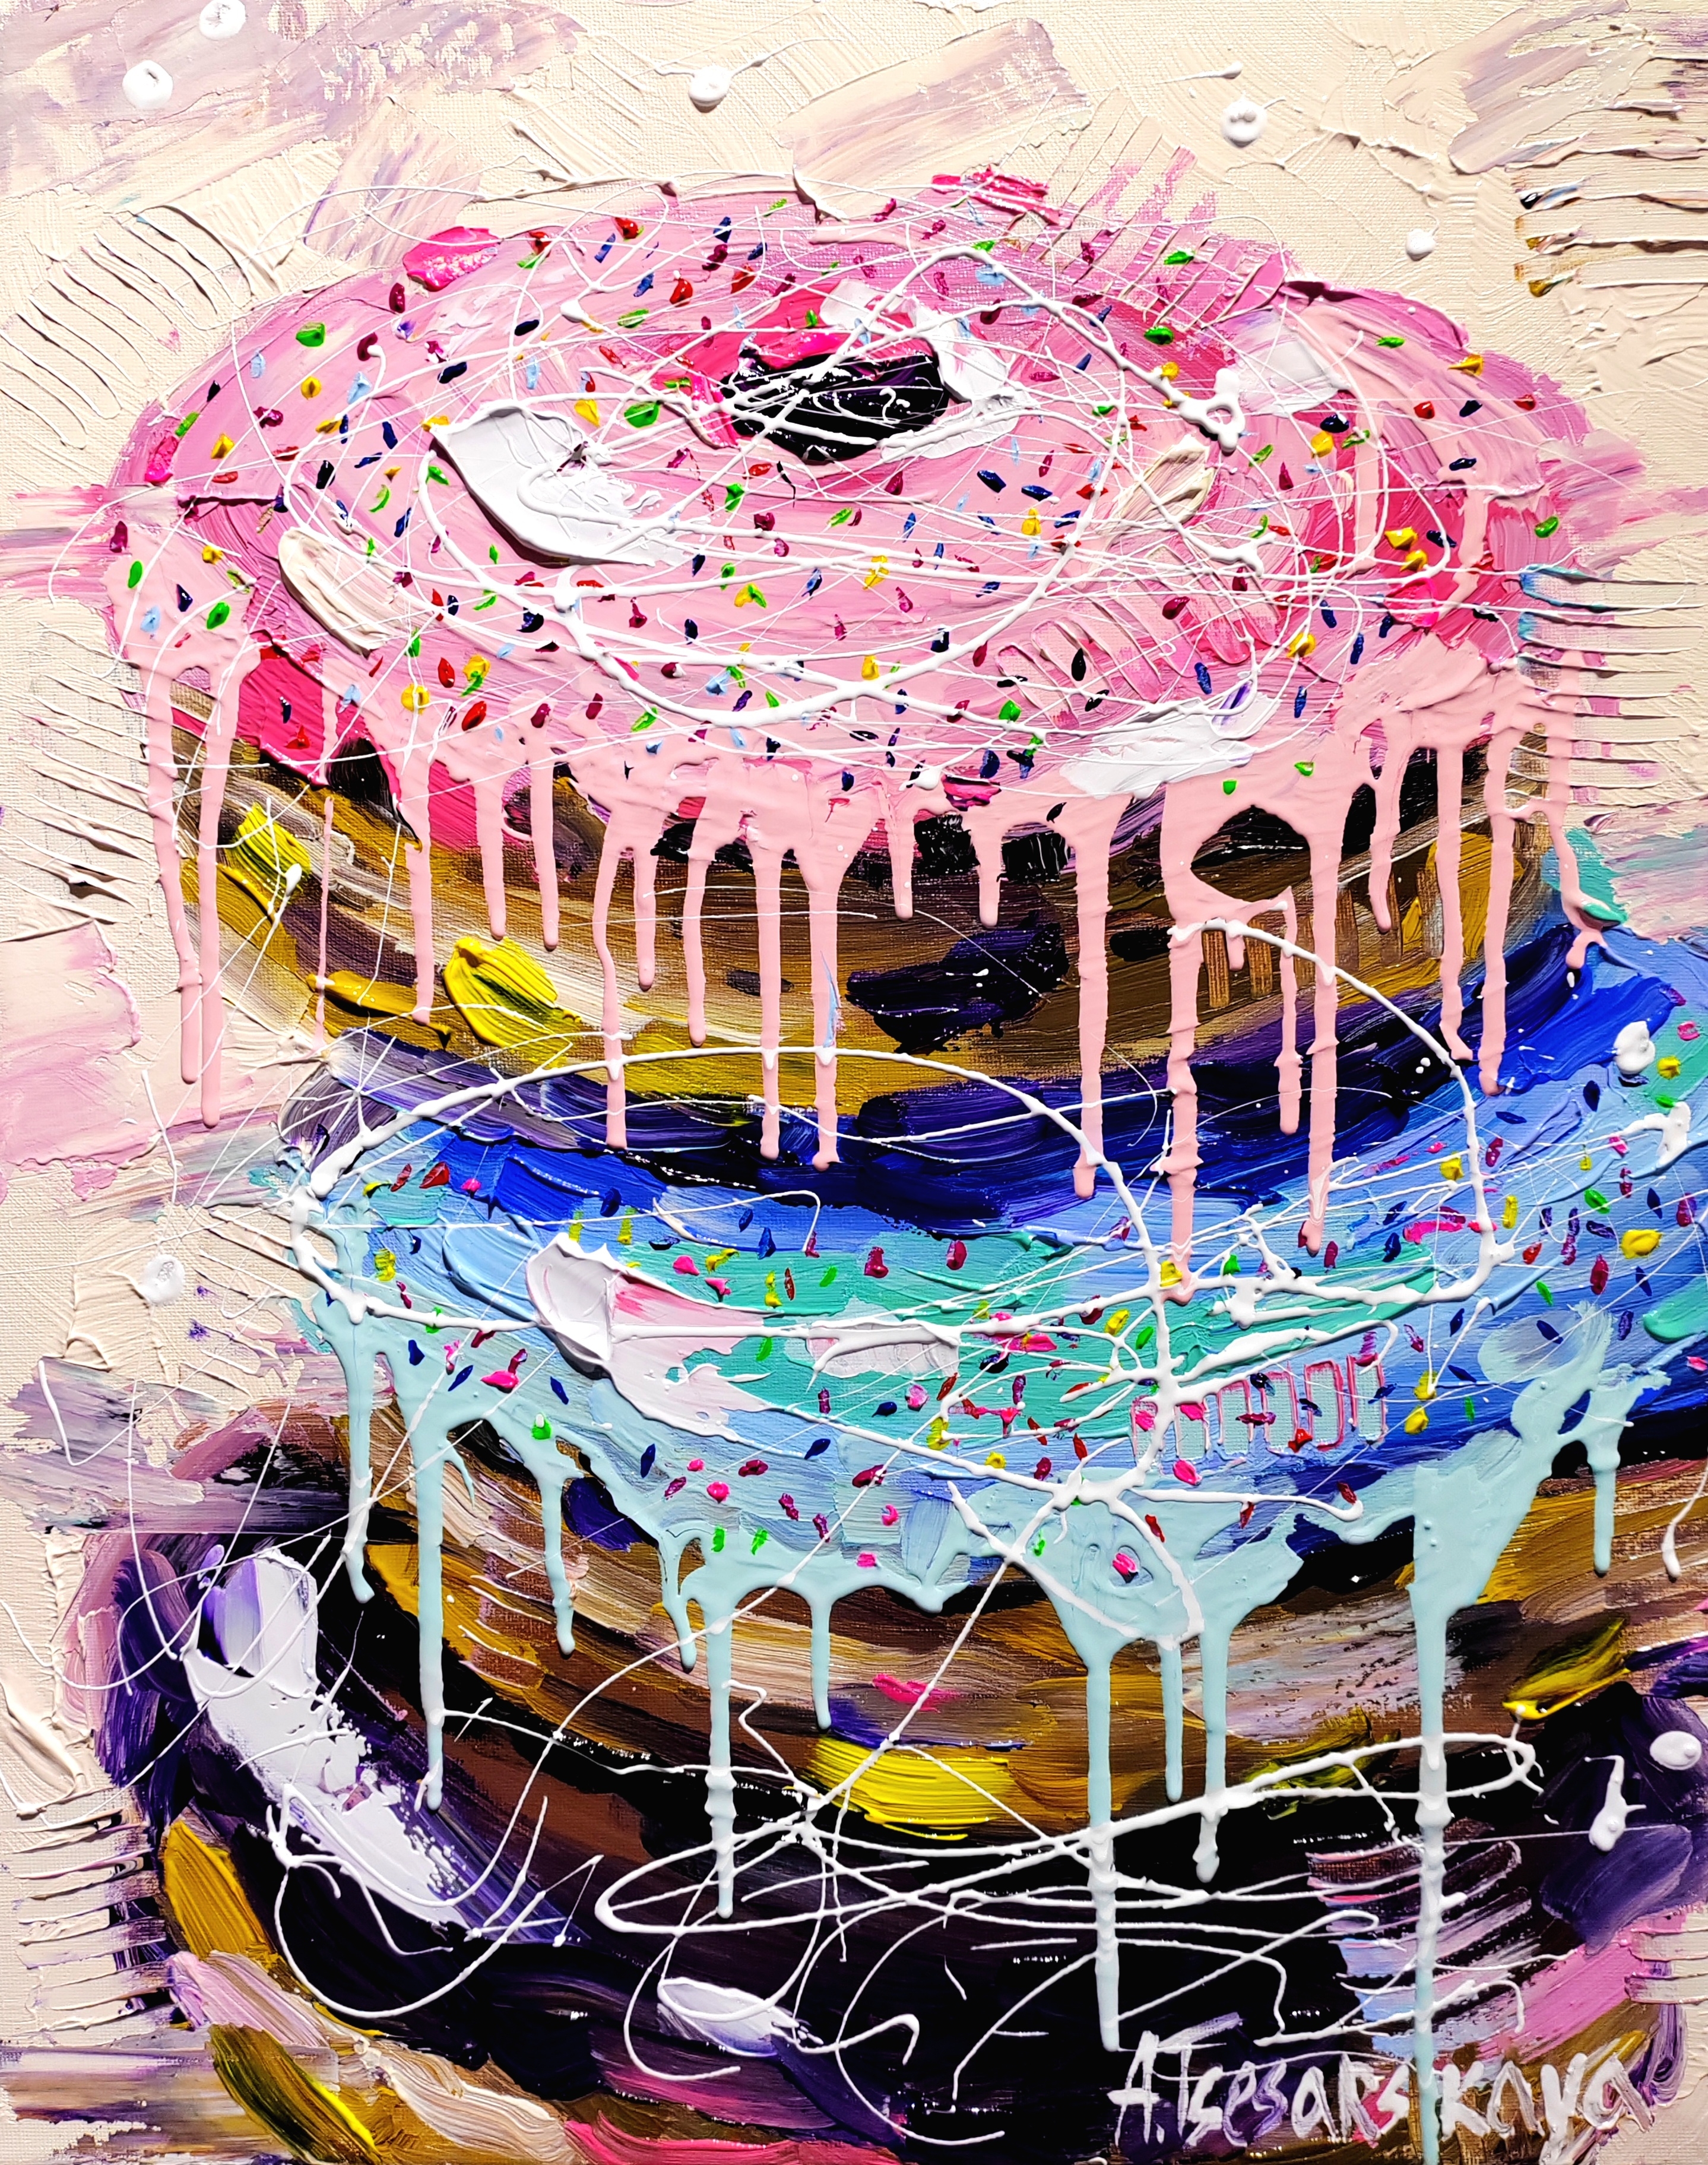 Sweet colorful donuts - food painting